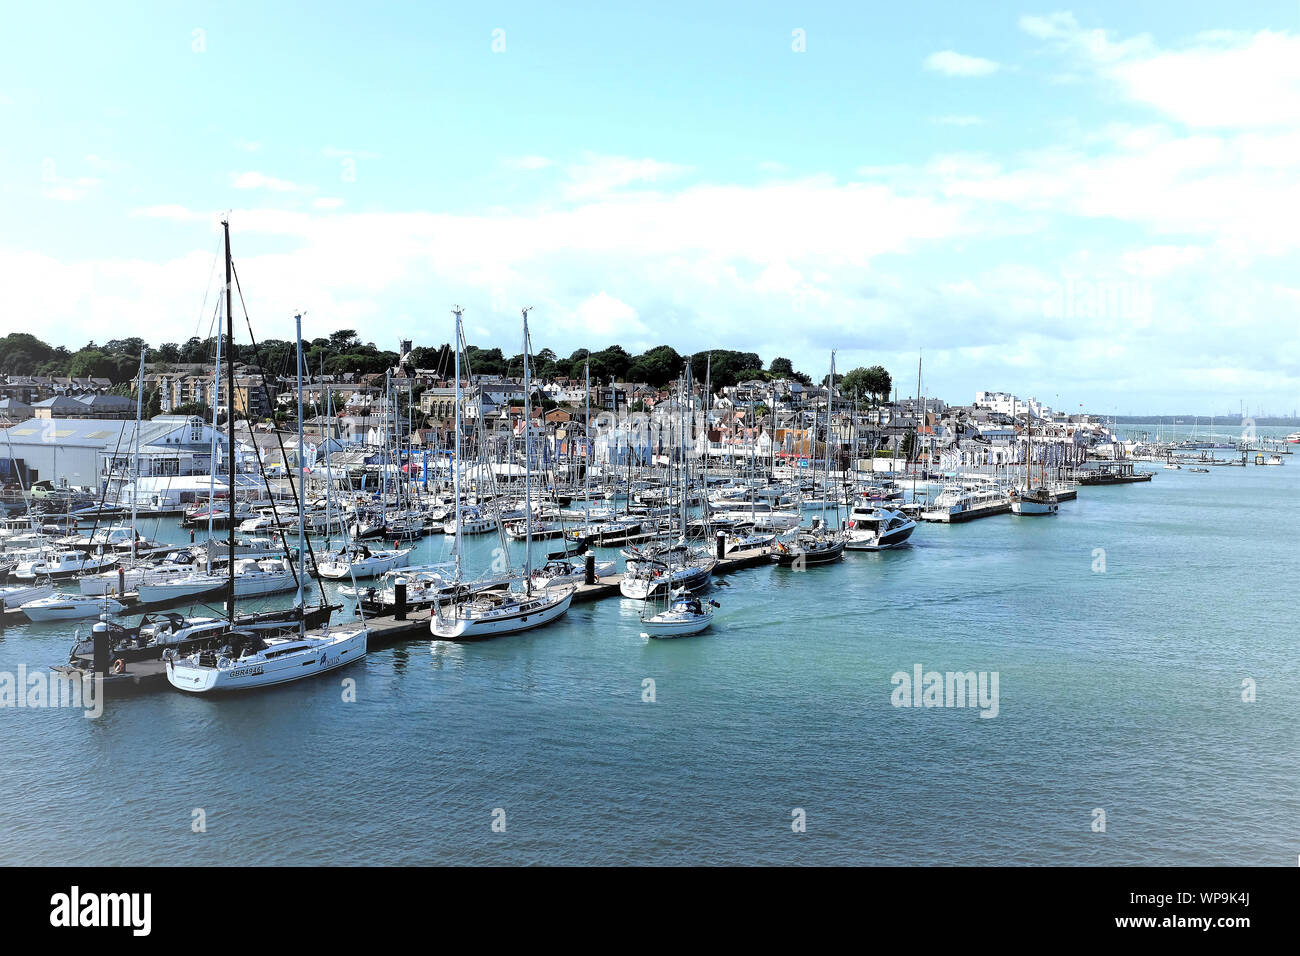 Cowes, Isle of Wight, UK. August 18, 2019. Sports people mooring Yachts and boats in the Marina of the yachting capital of the world of Cowes on the I Stock Photo